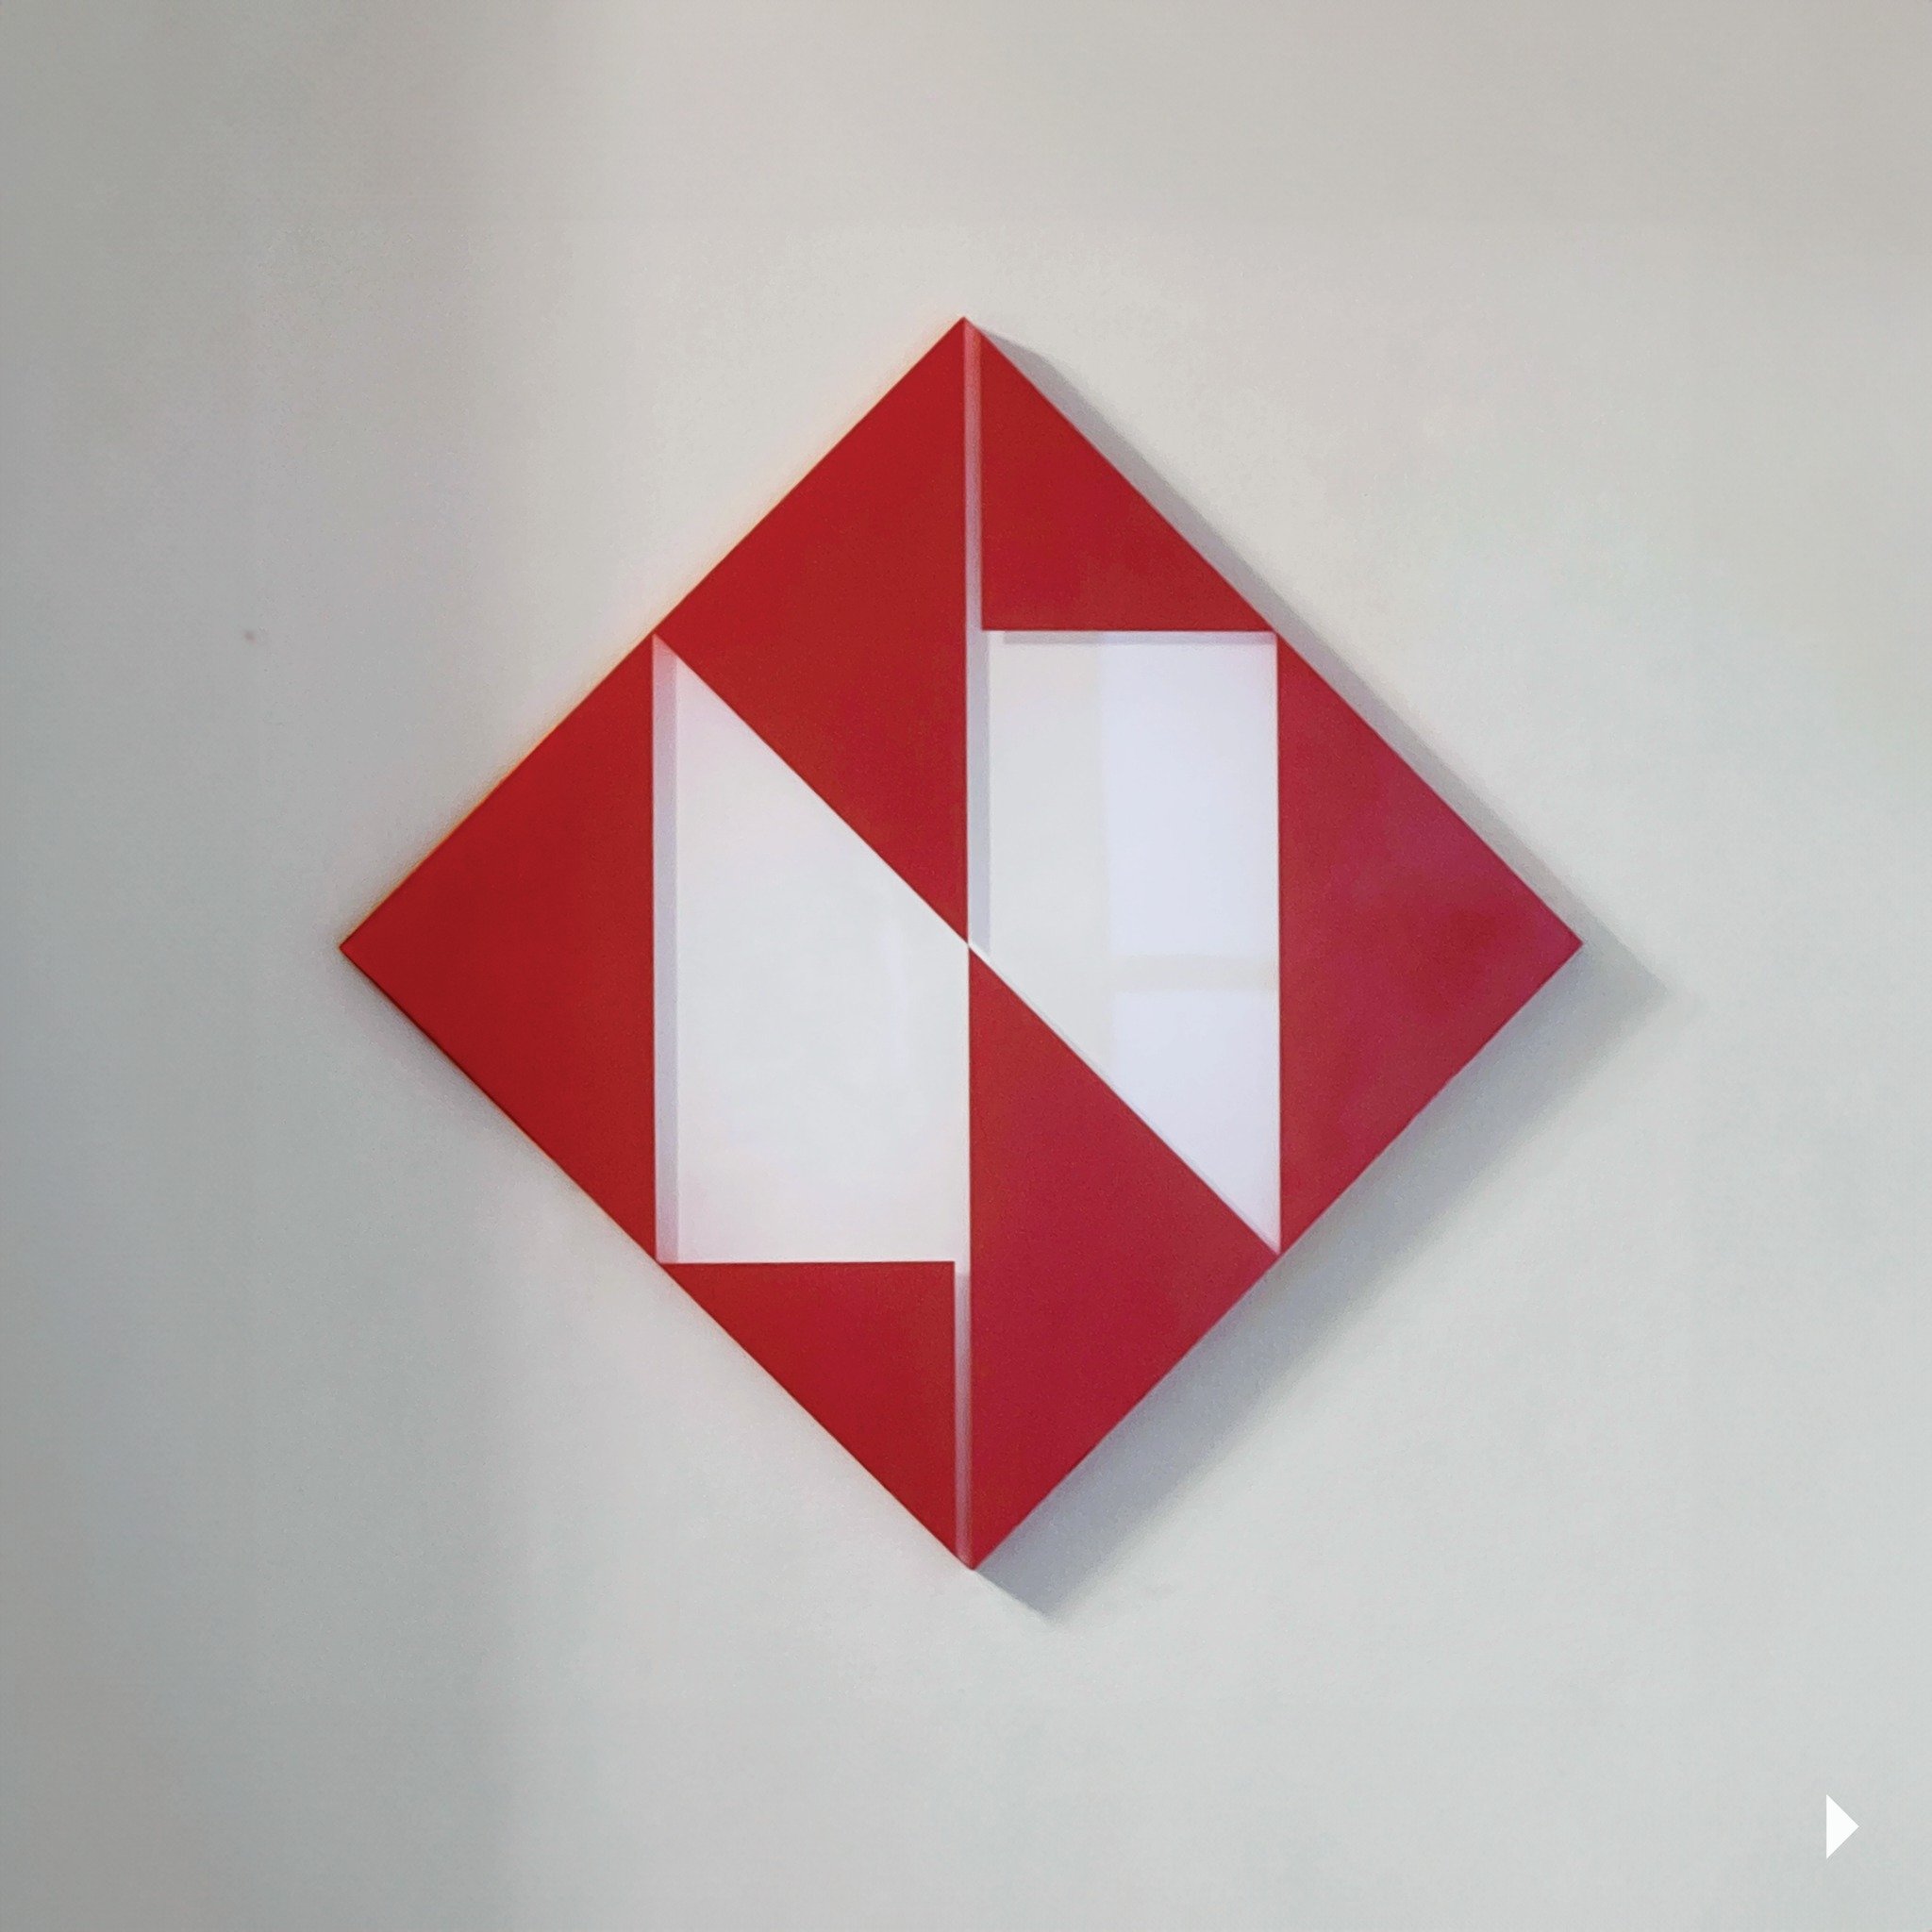 Finally, an office sign. Knowing that our building will be demolished in the future, we wanted a simple sign for the office. Thanks to Atlantex Creative Works for helping us out. While it took us a couple of tries, we love the dimensionality of this 